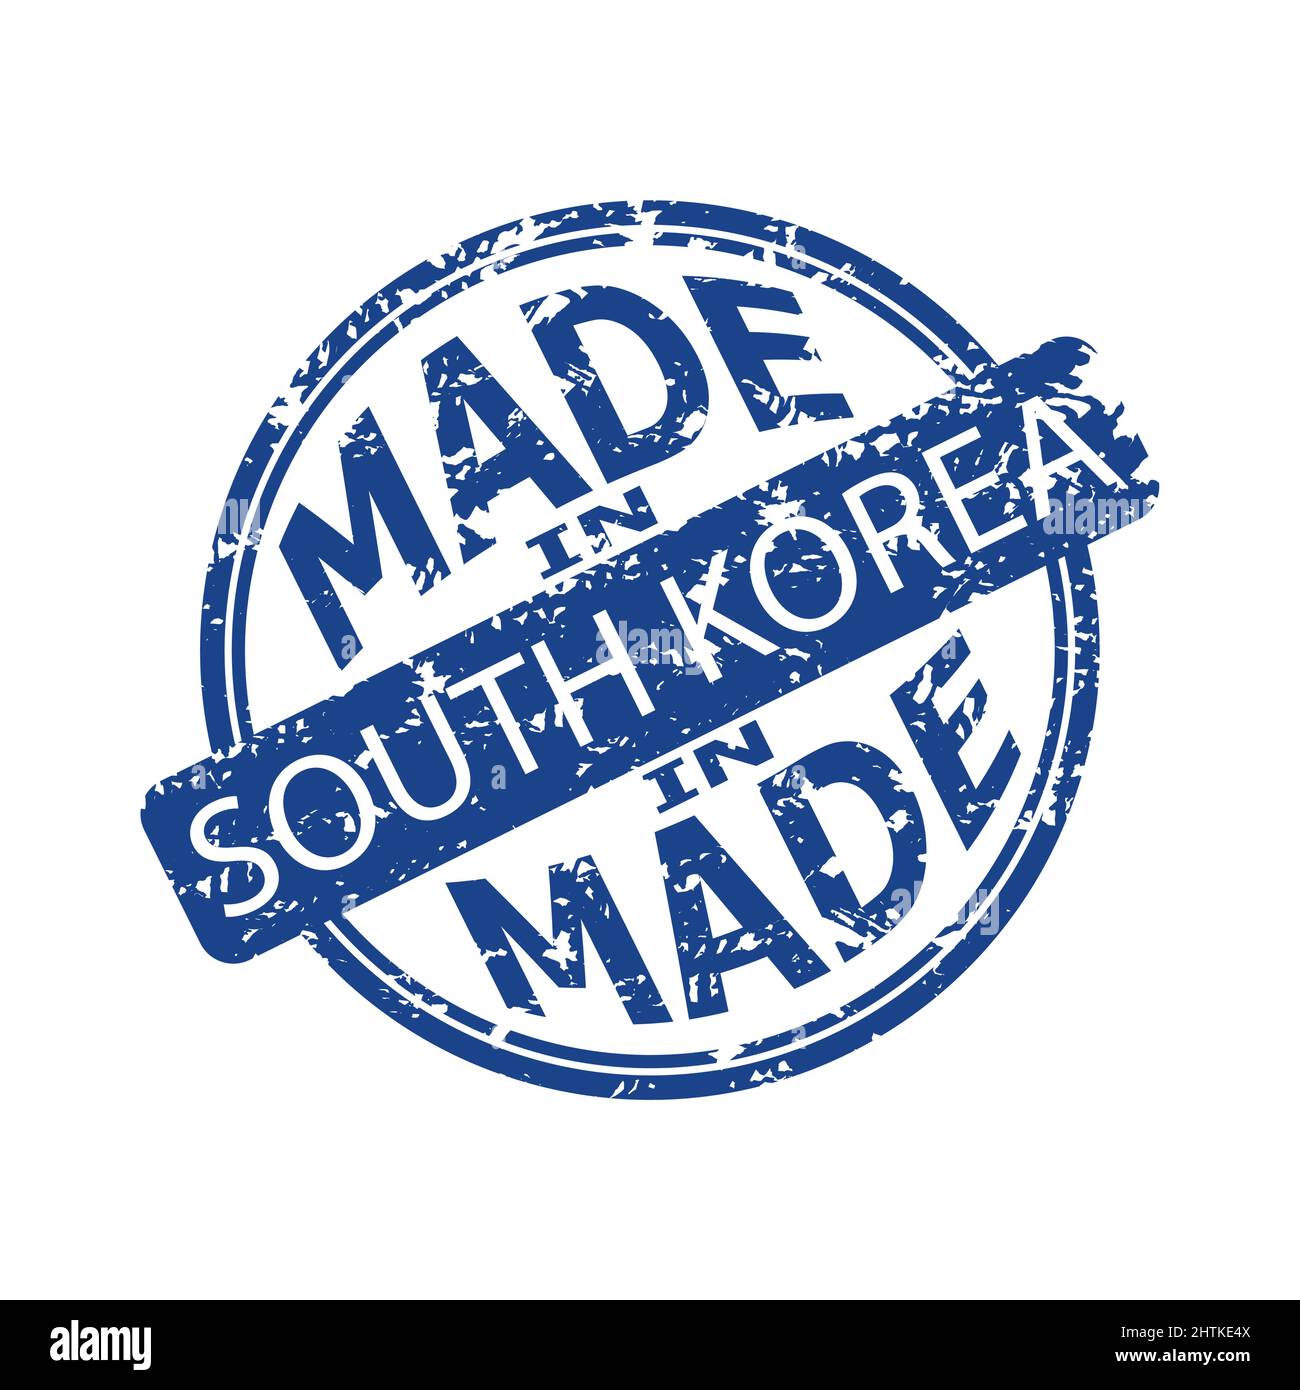 Rubber stamp label, production in south korea, sign asian quality. Made in South Korea, korean stamp, international shipping, country lable, asian ind Stock Vector